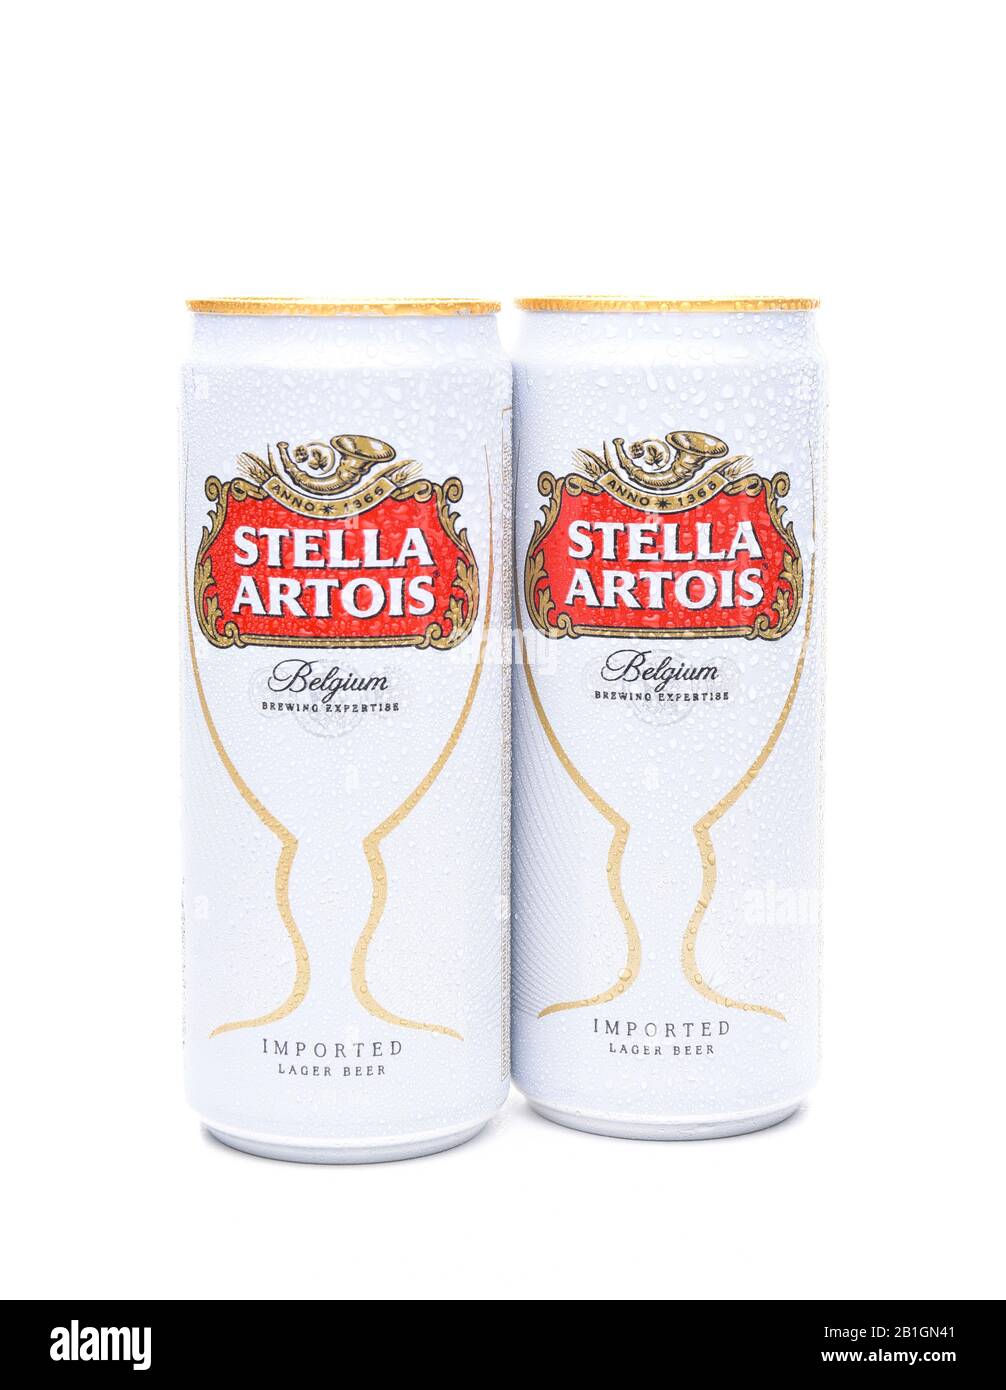 IRVINE, CA - JULY, 17, 2017: Cans of Stella Artois Beer on white. Stella has been brewed in Leuven, Belgium, since 1926, and launched as a festive bee Stock Photo